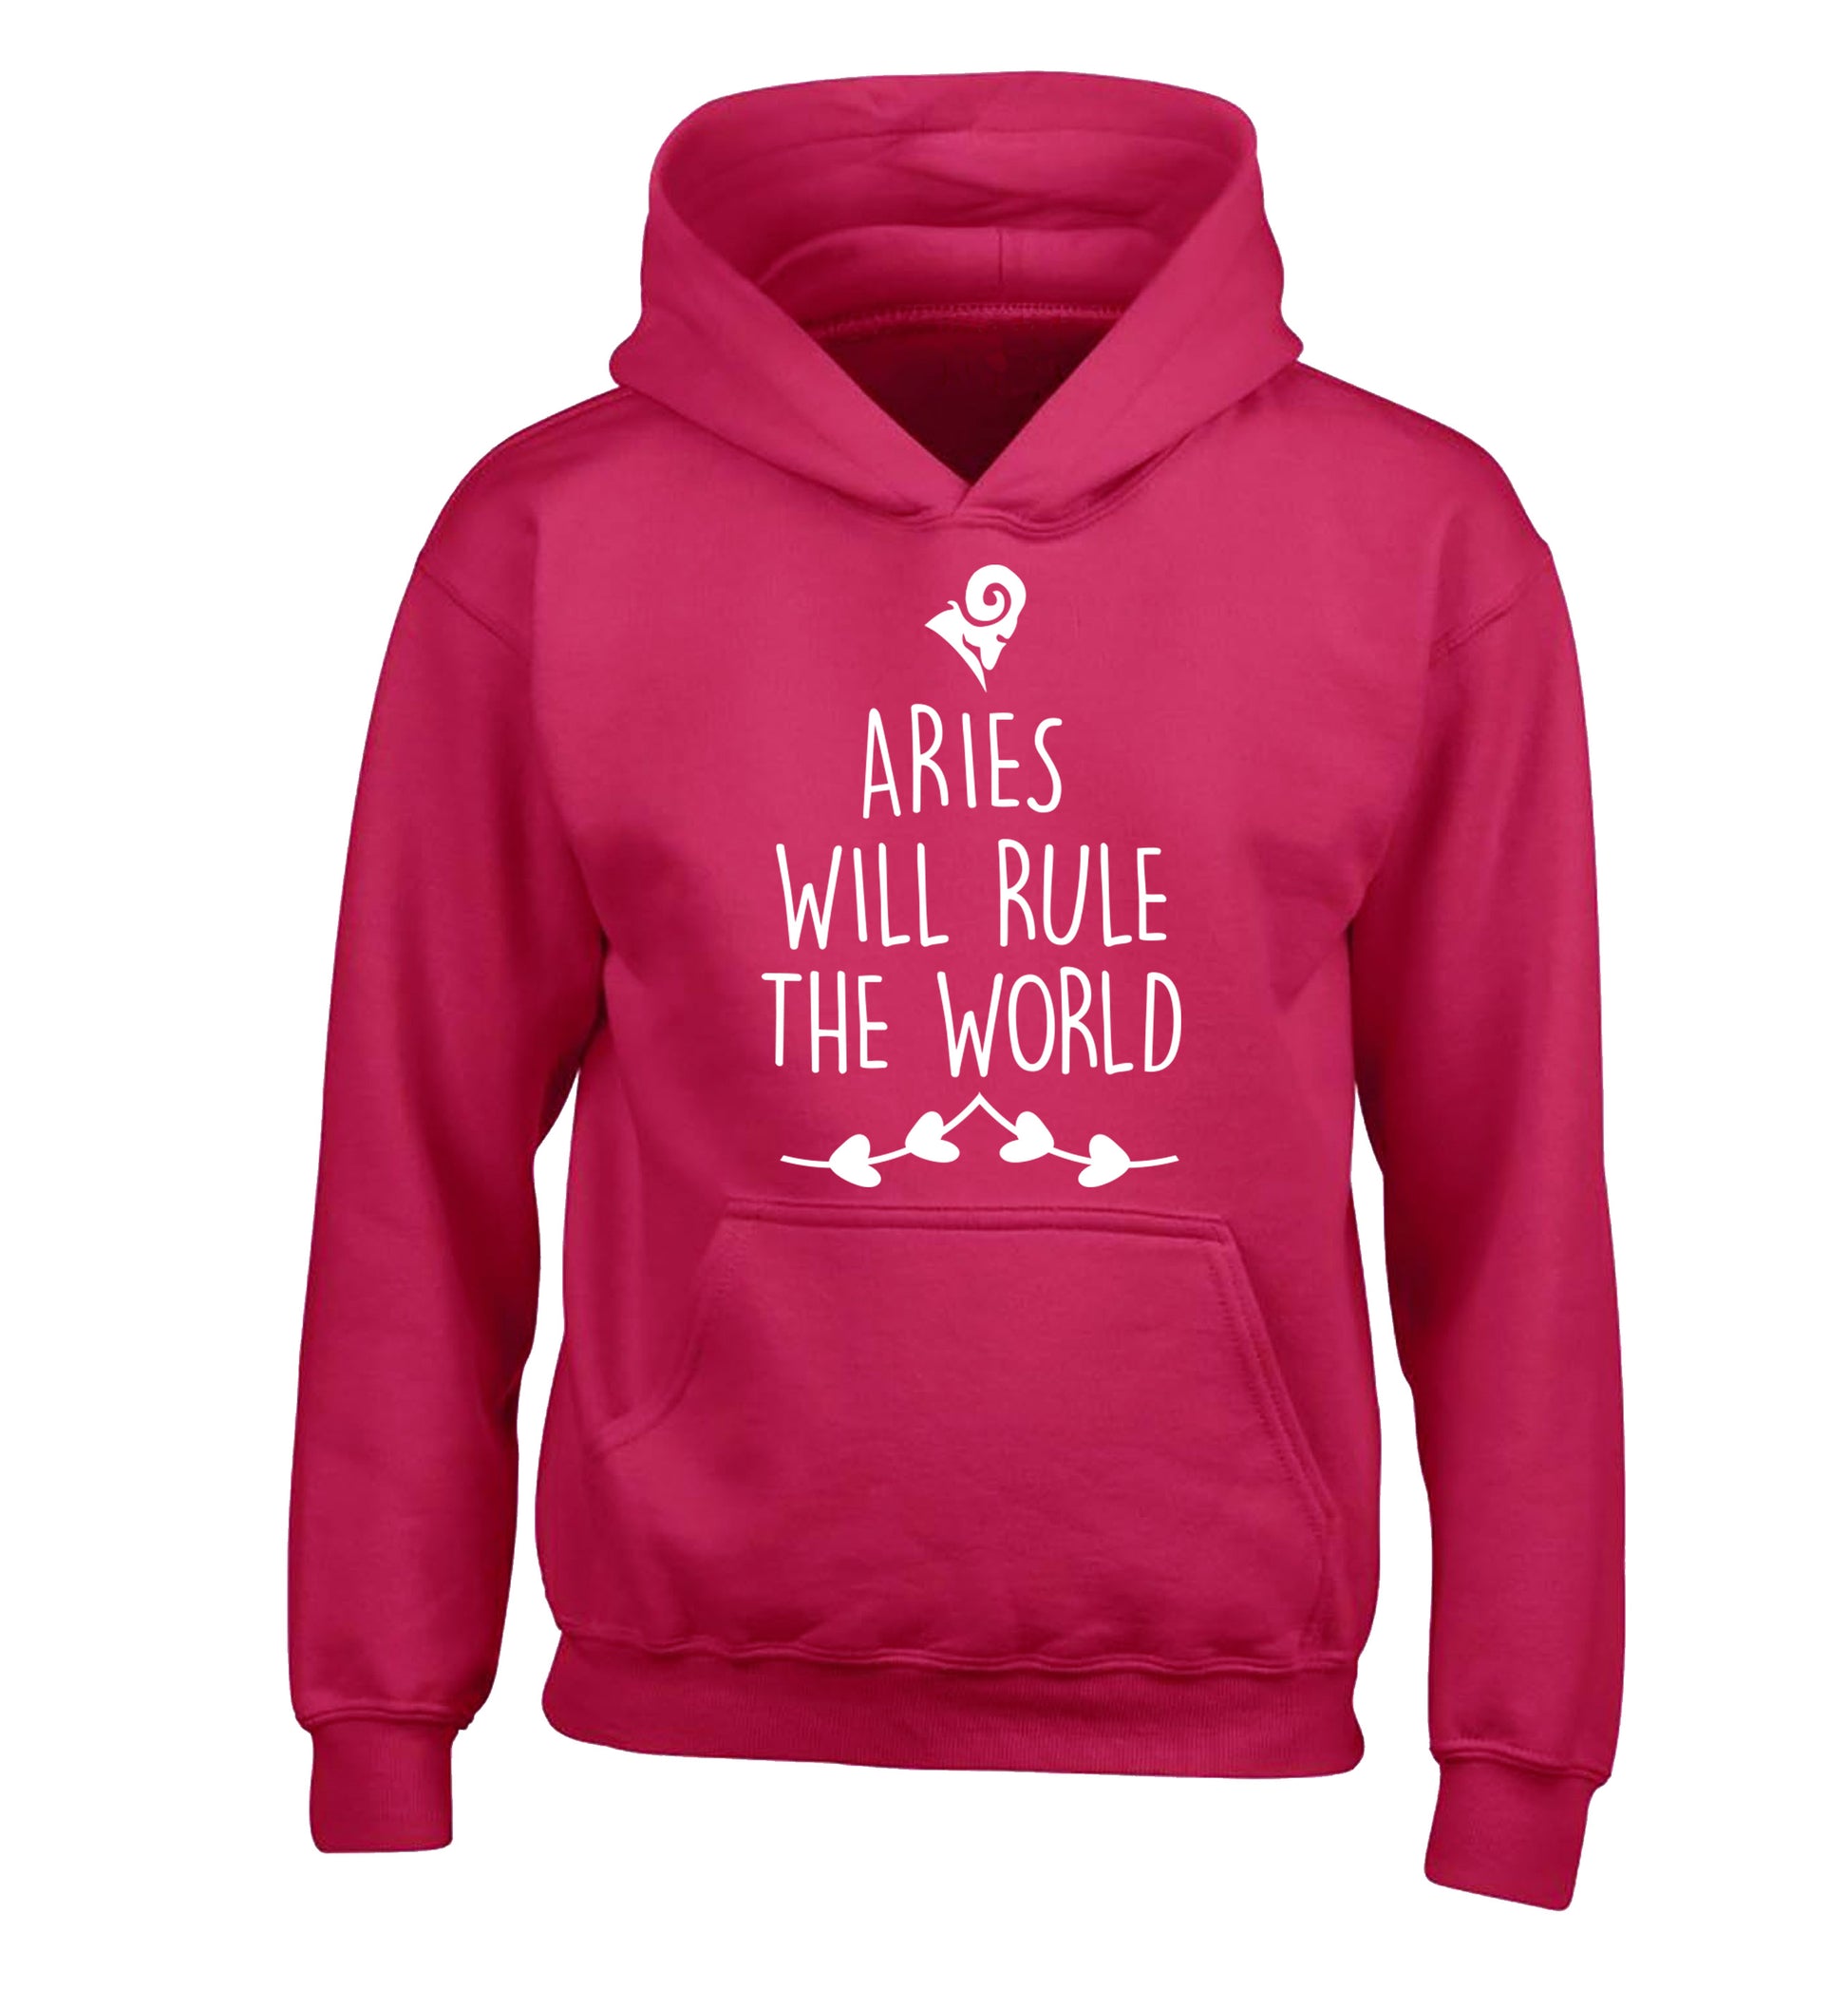 Aries will rule the world children's pink hoodie 12-13 Years